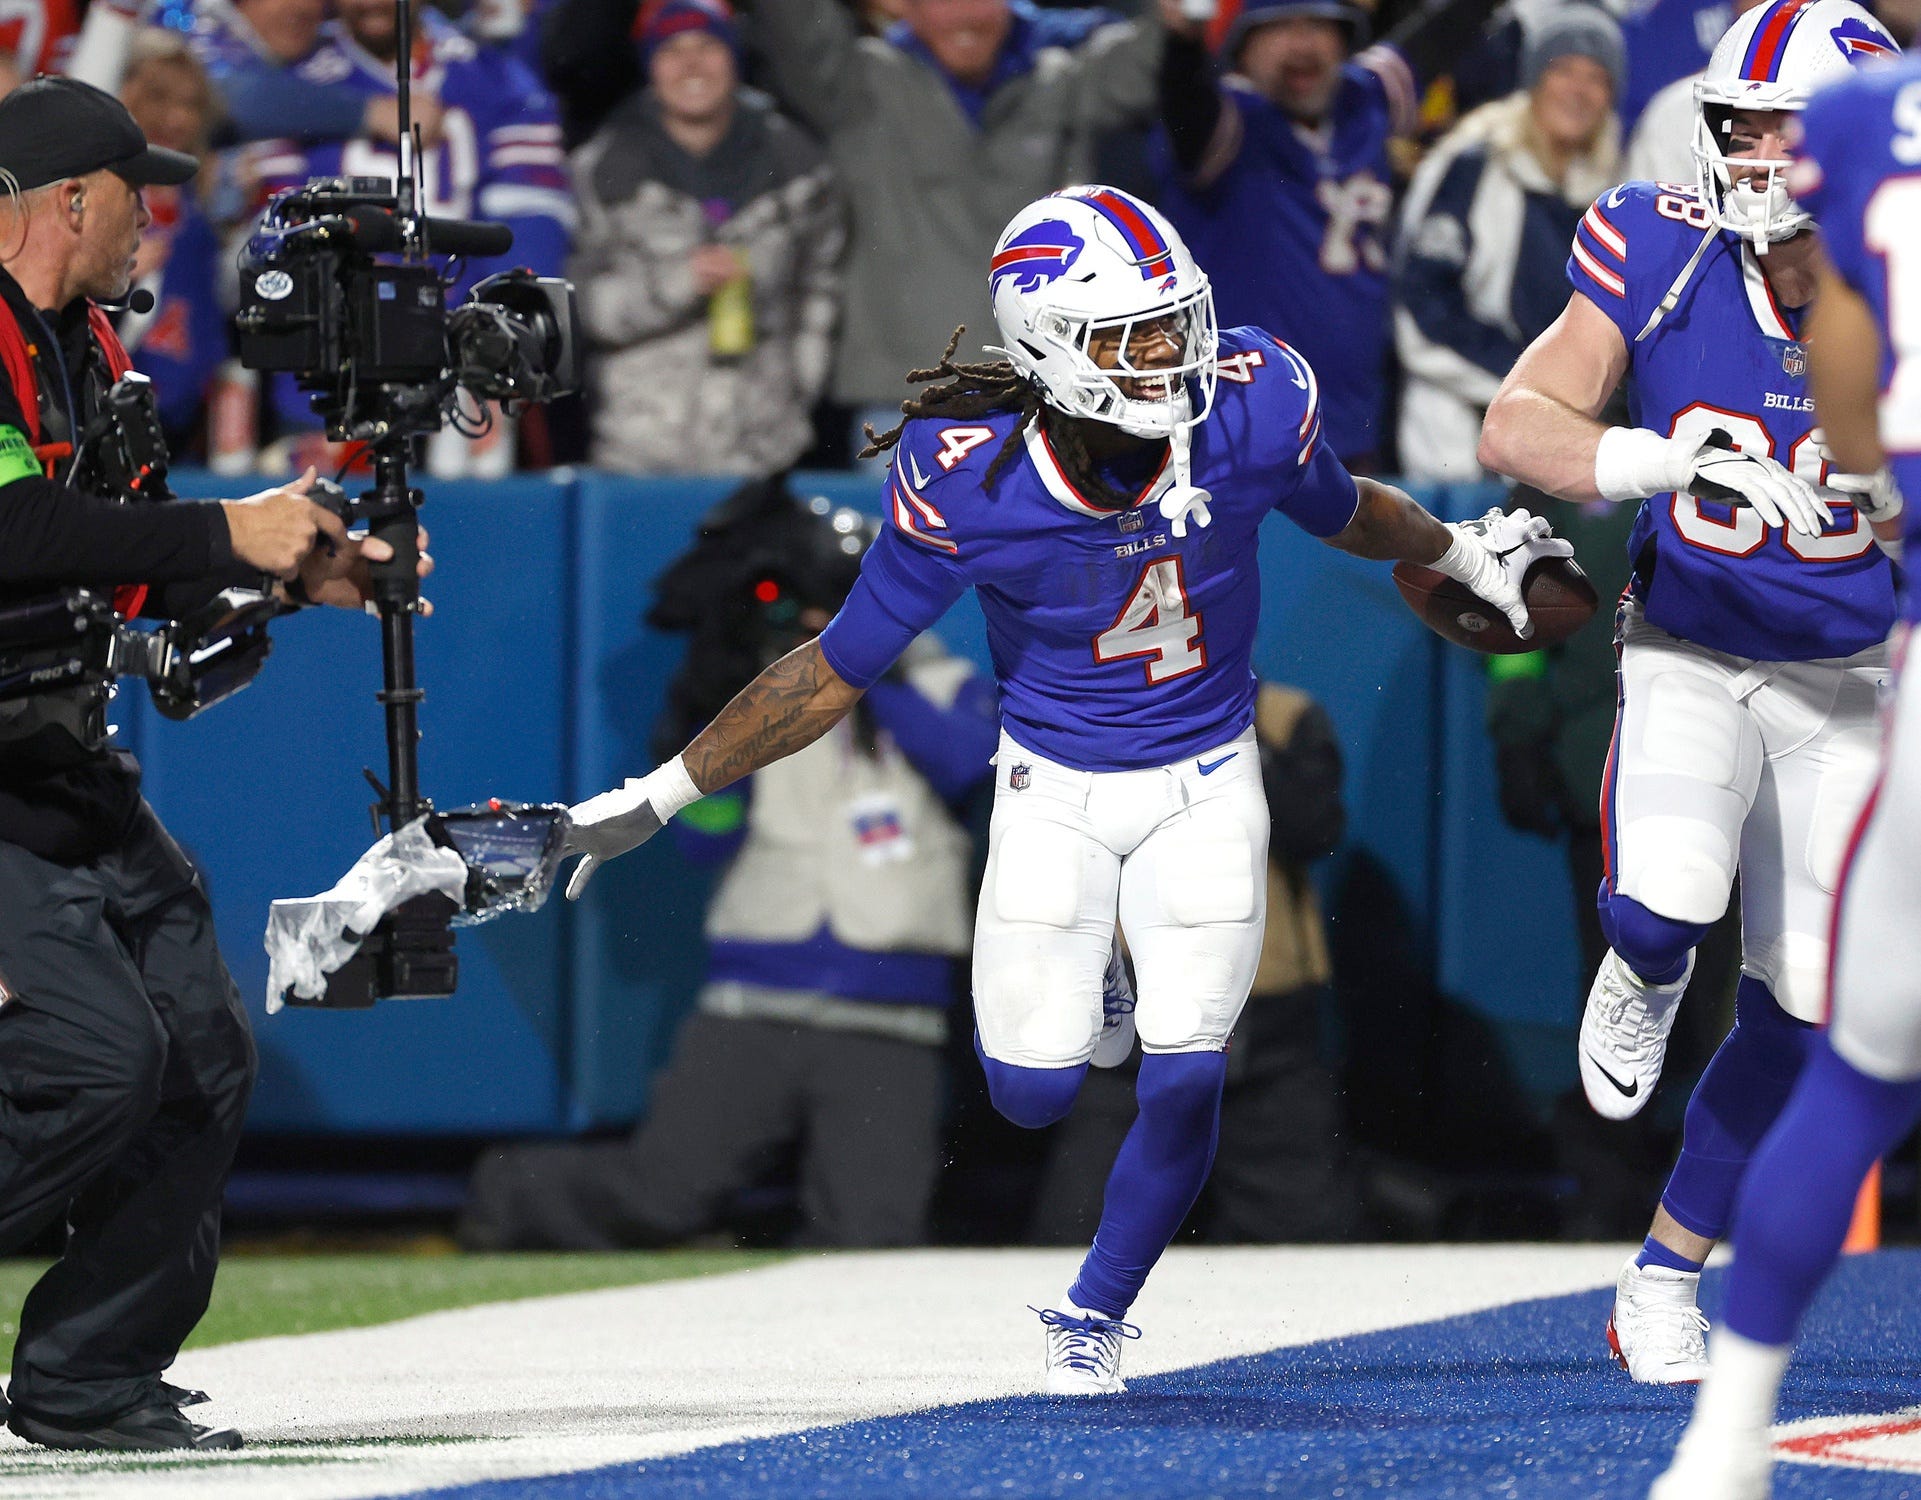 Saturday Night Football How to watch Bills vs. Chargers with